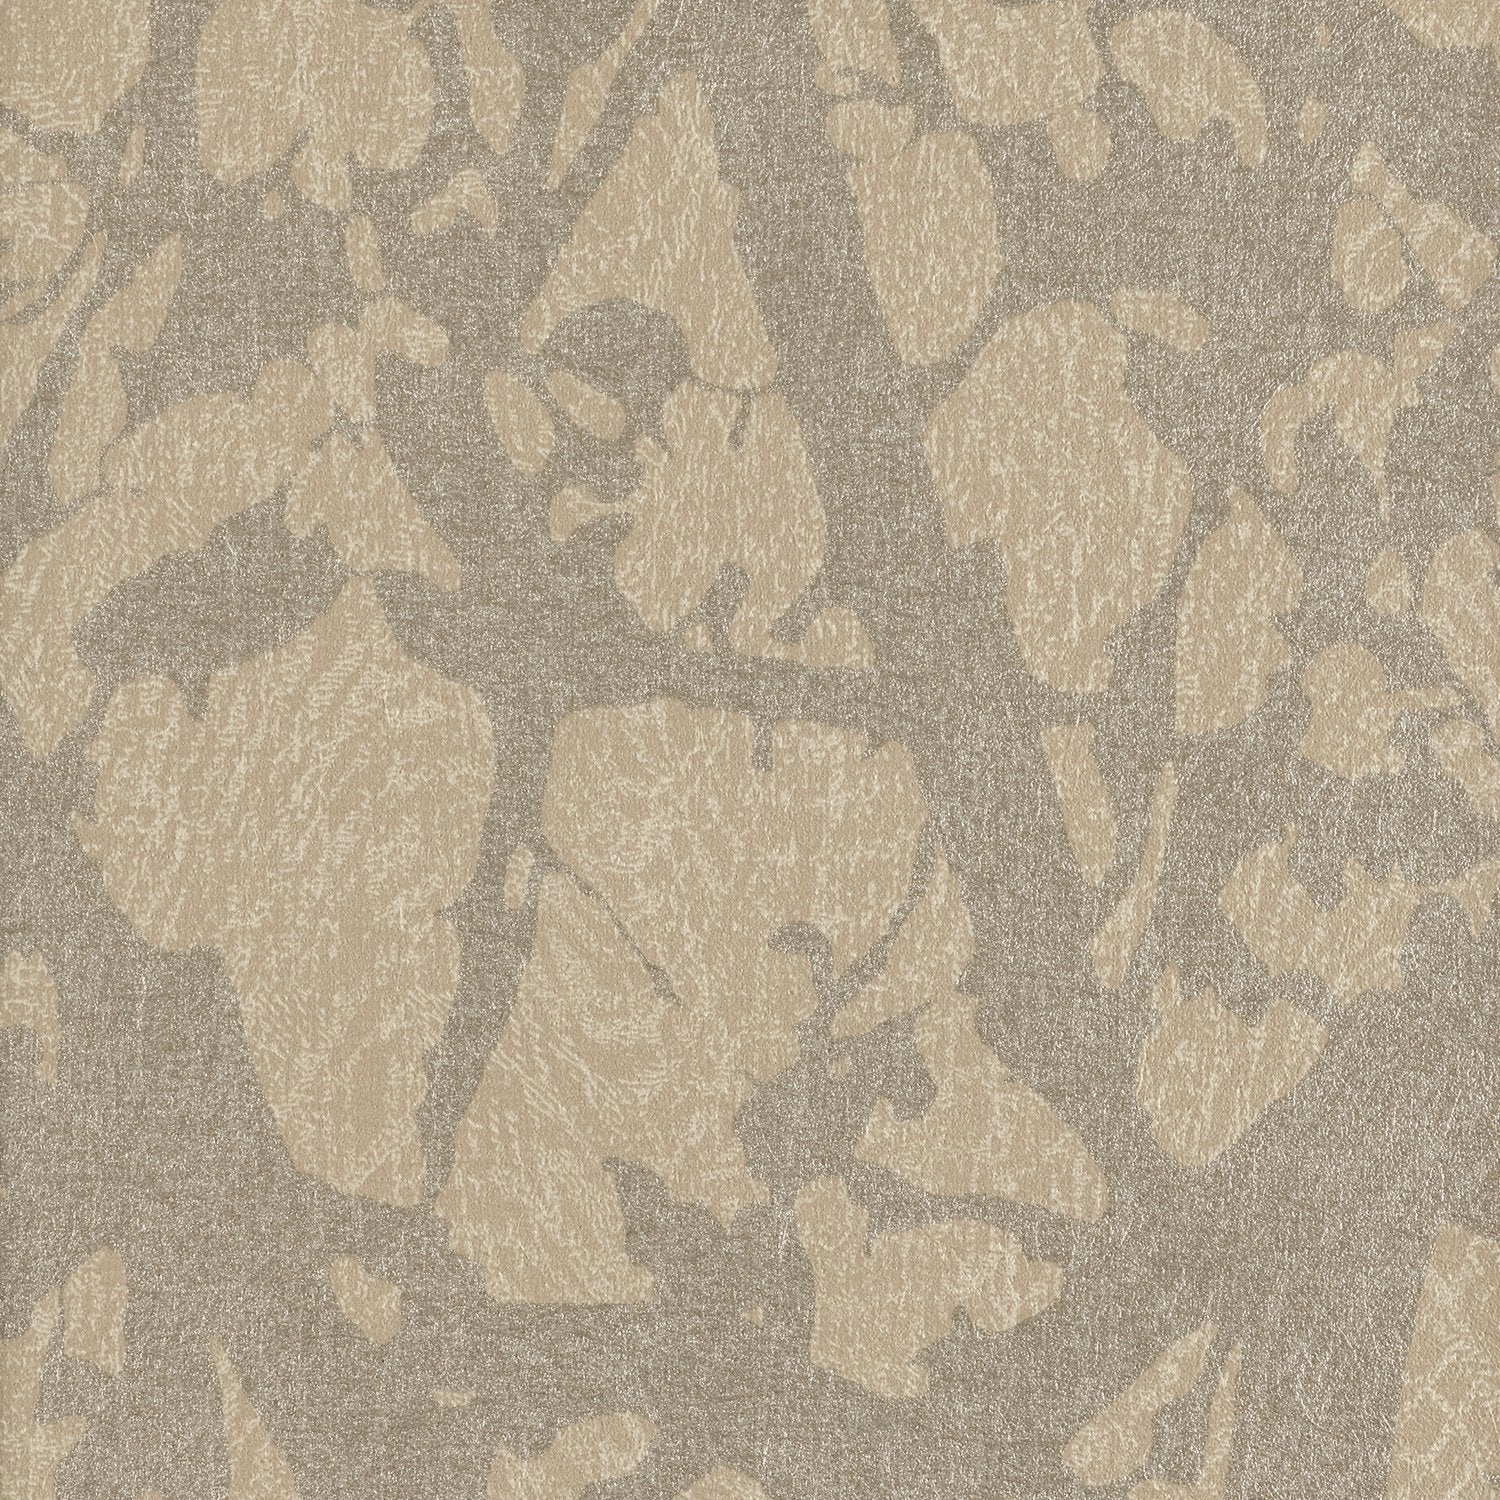 Canopy - Y46844 - Wallcovering - Vycon - Kube Contract